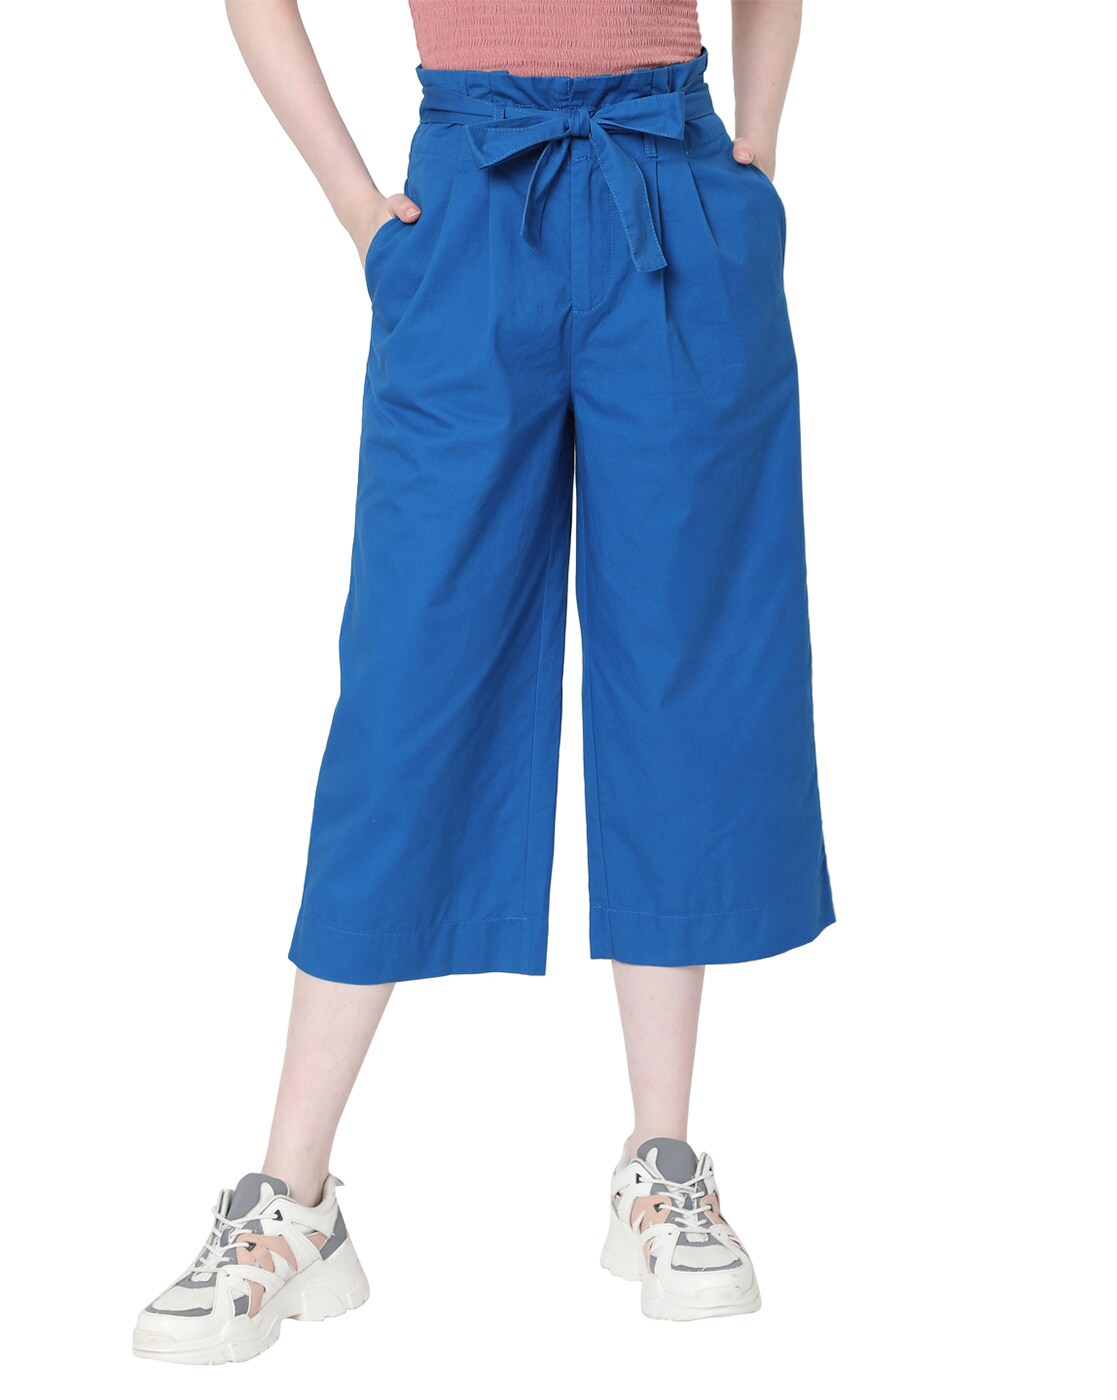 Flared Culottes with Belt